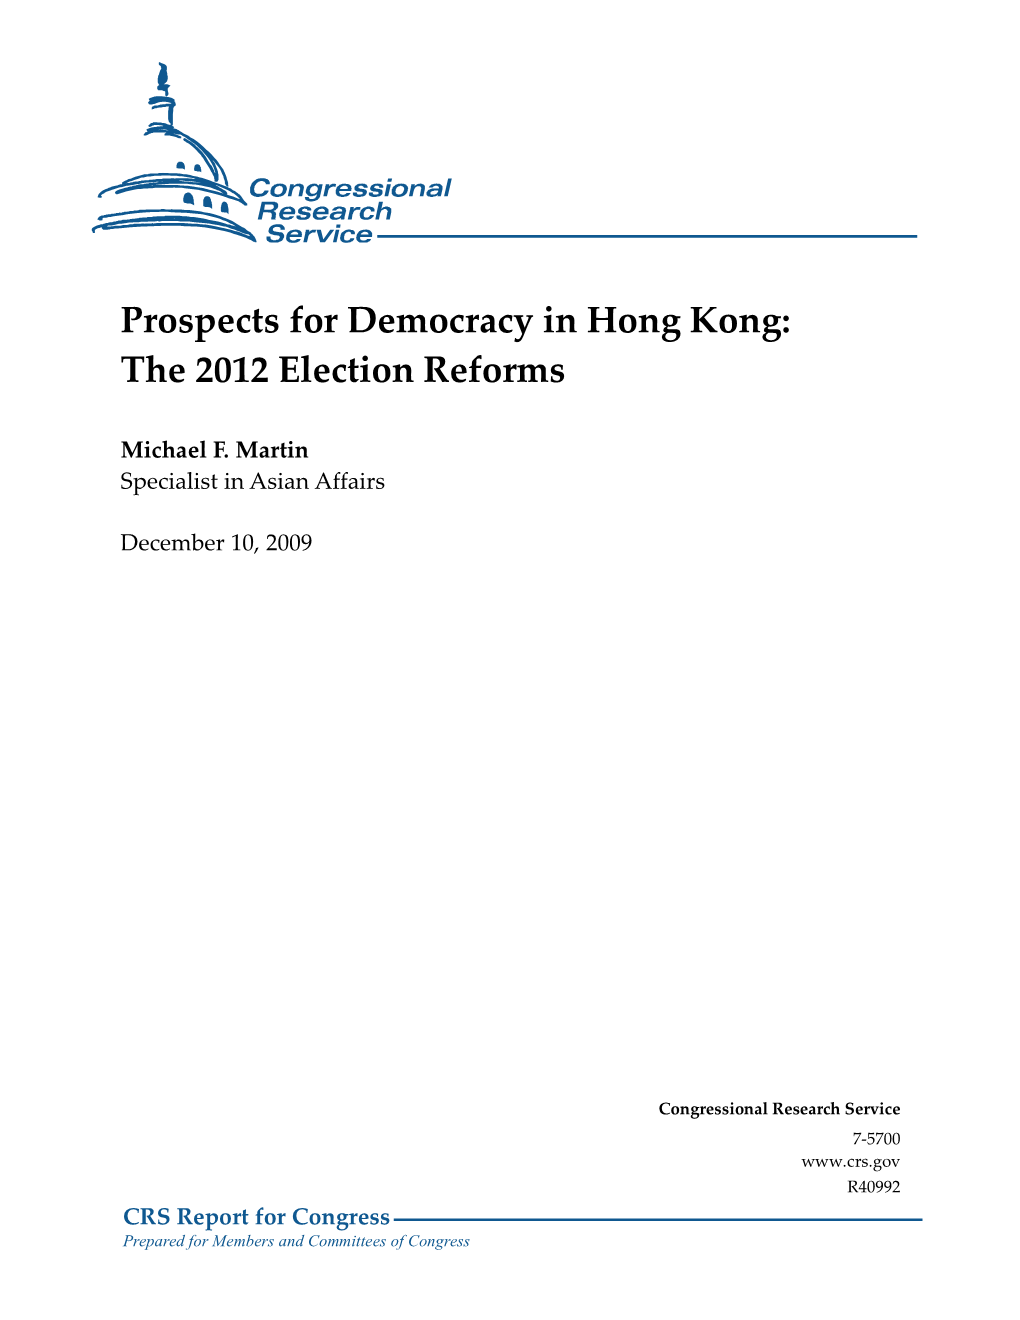 Prospects for Democracy in Hong Kong: the 2012 Election Reforms